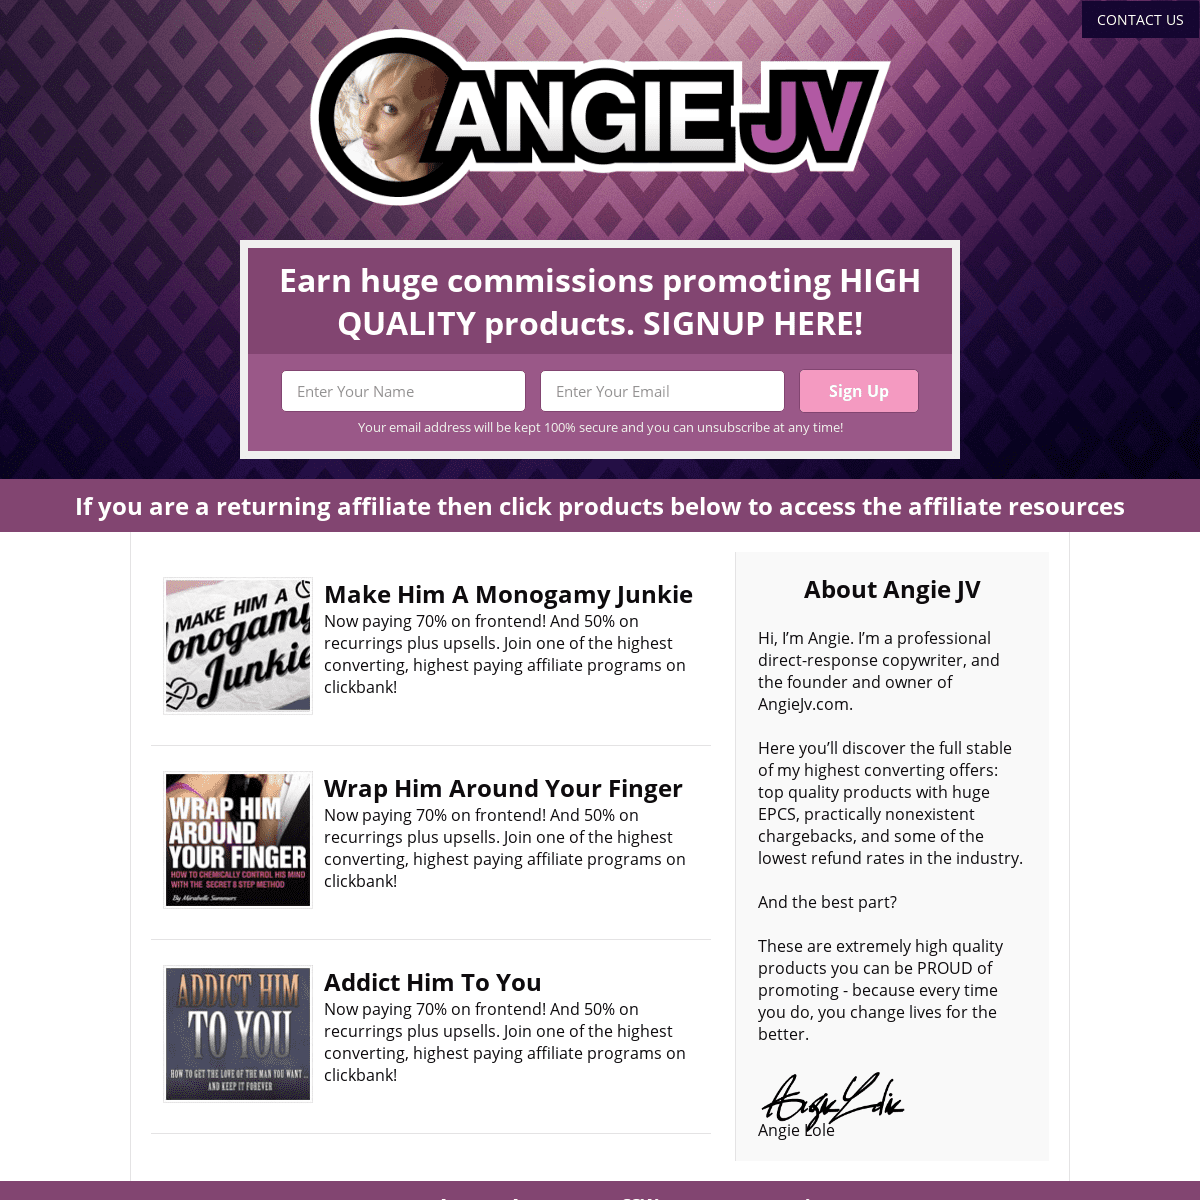 Angie JV | Welcome to Angie JV Site